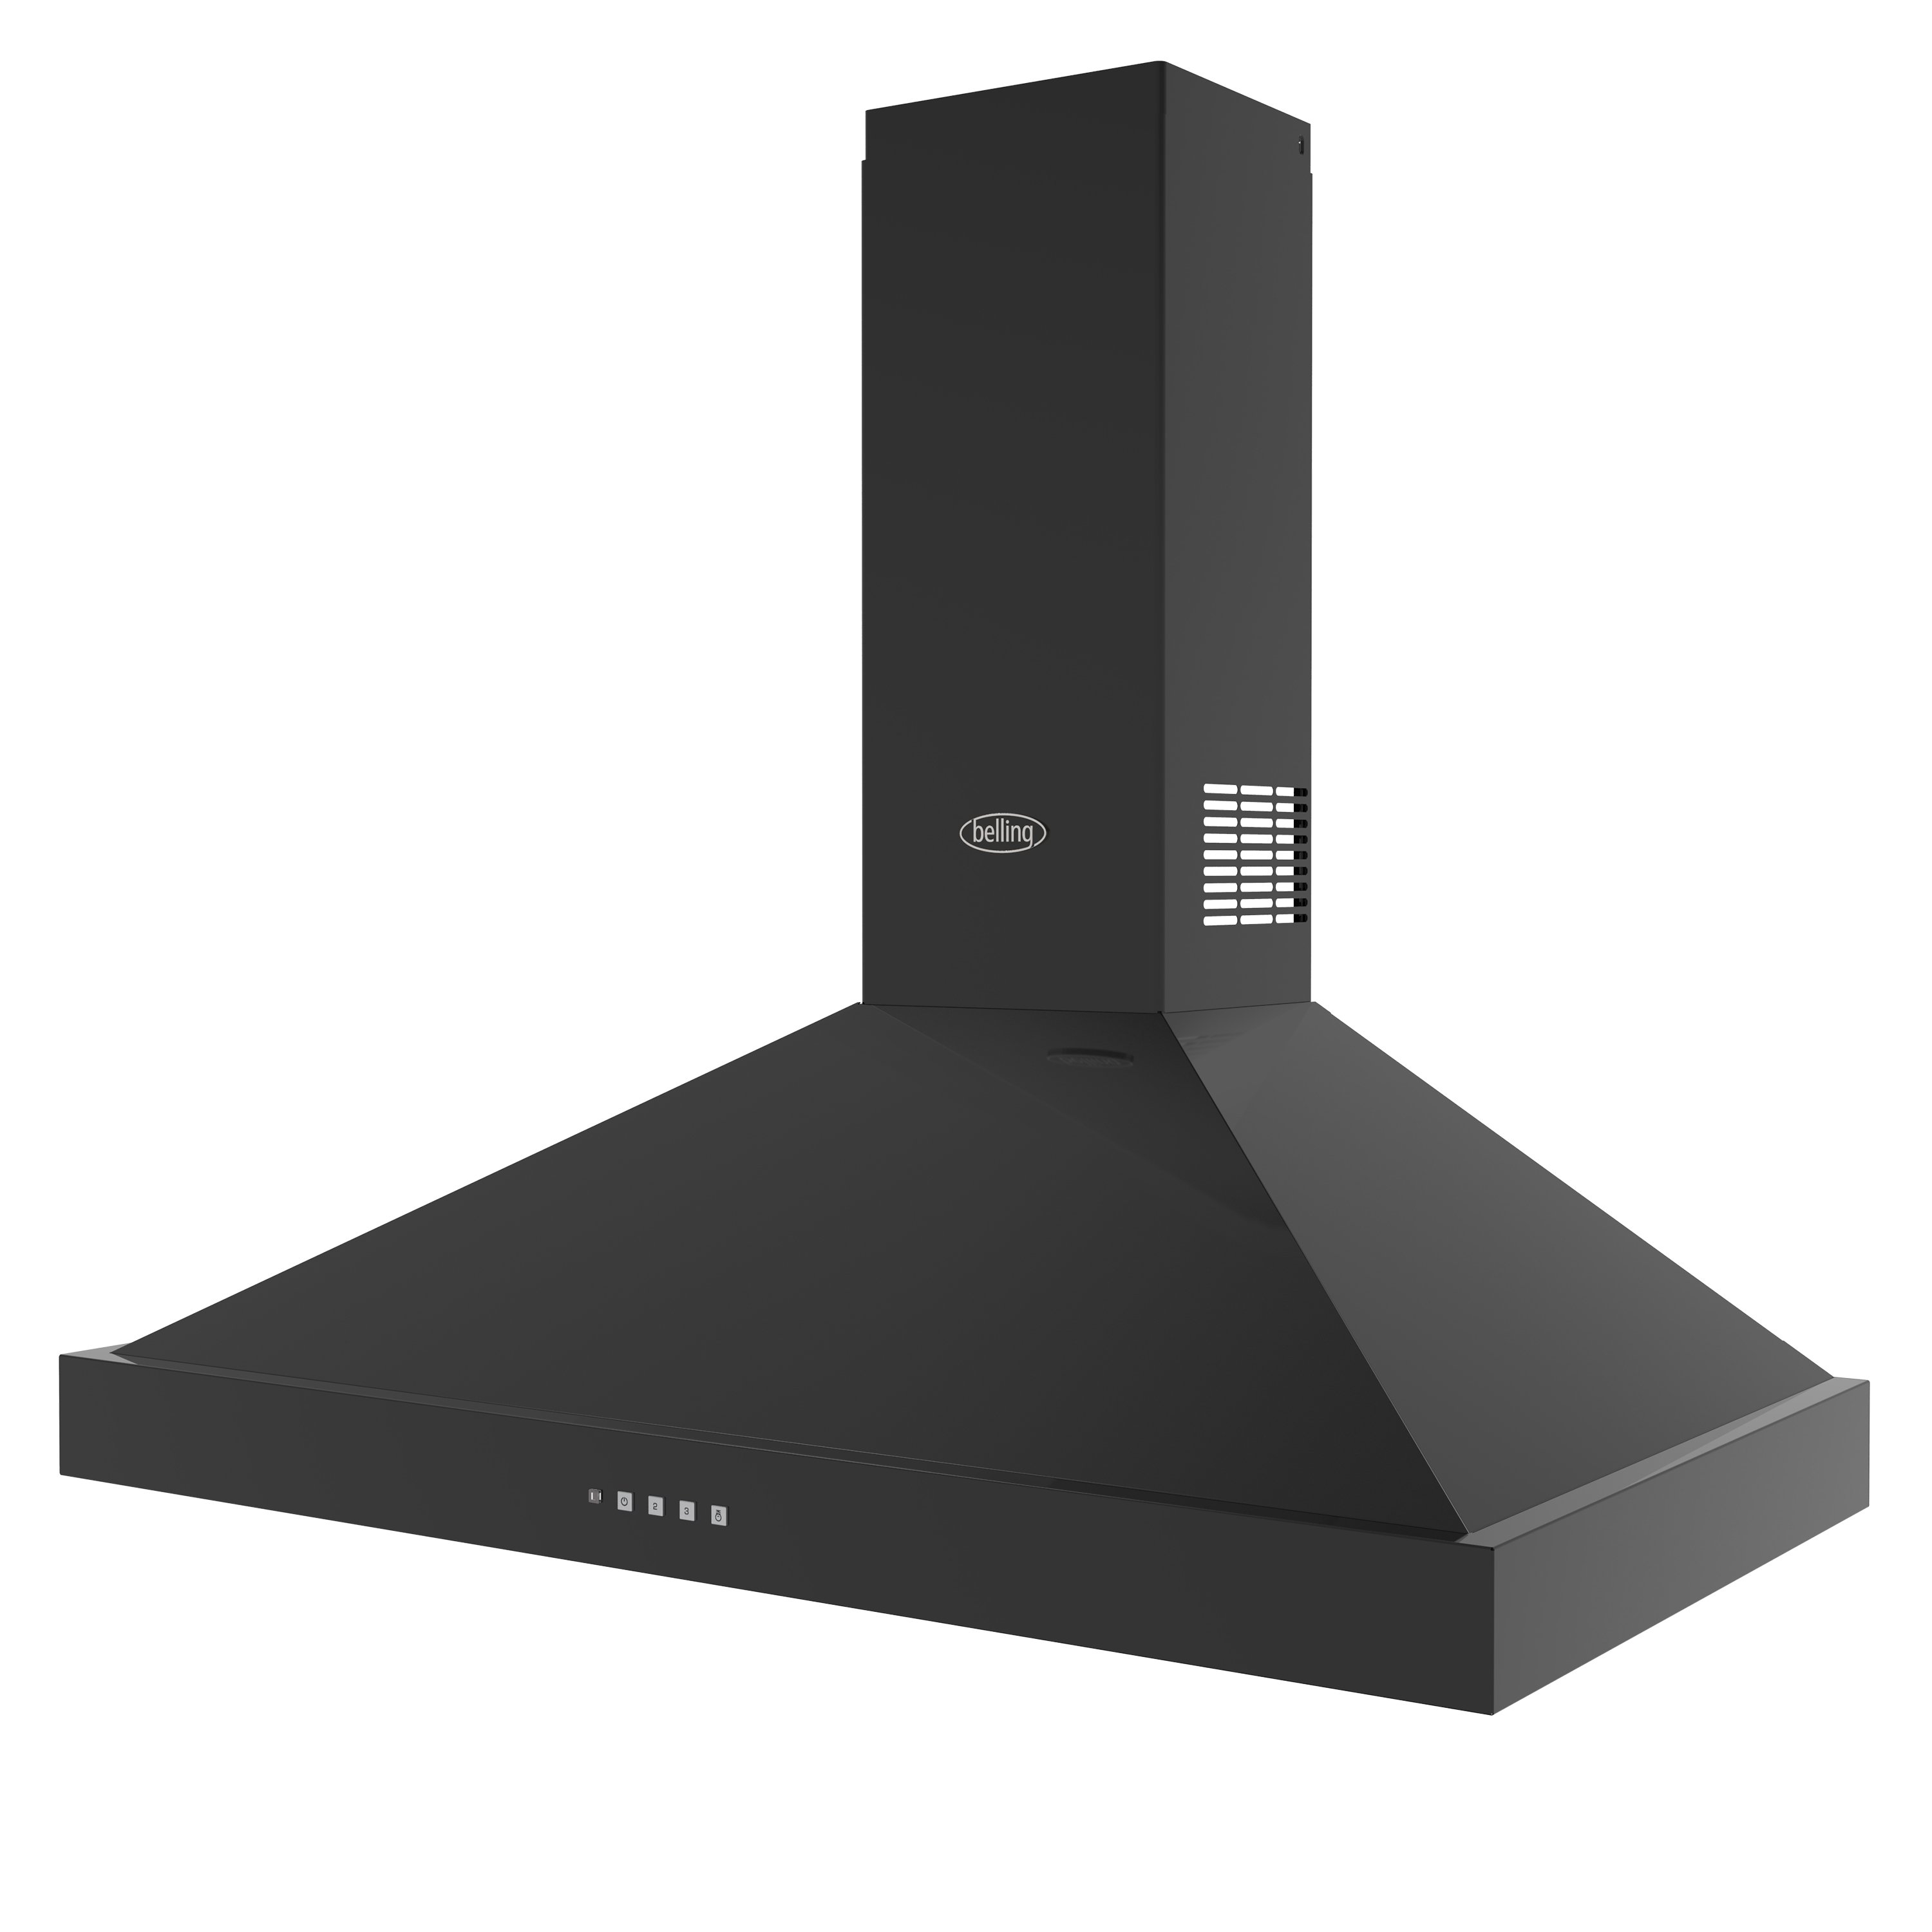 110cm Chimney hood with 3 fan speeds, 2 LED lights, 2 washable grease filters and extendable chimney section